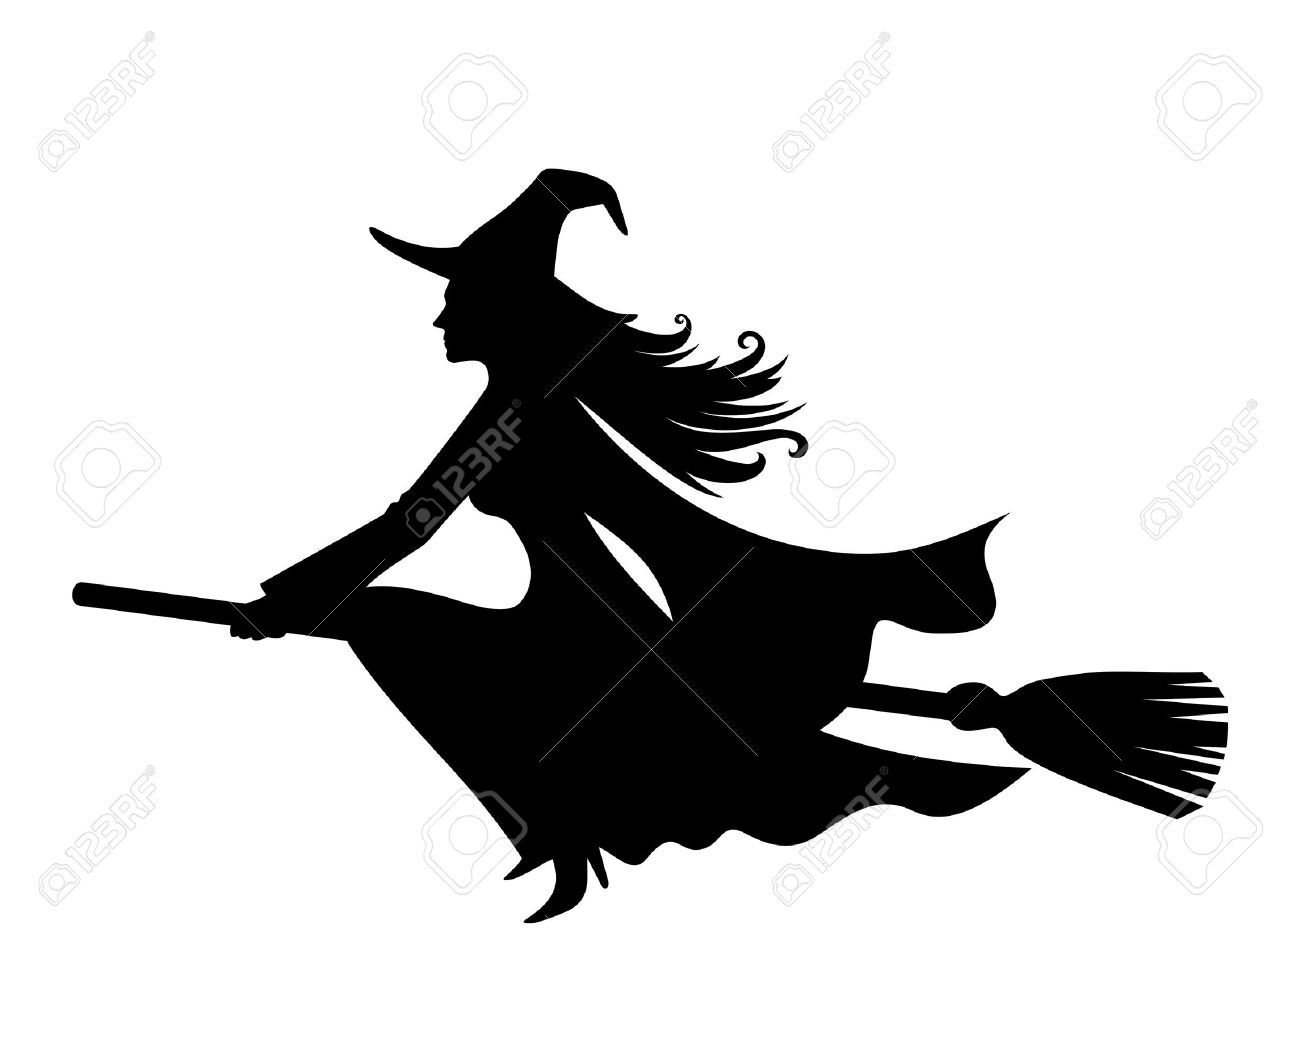 Witch images stock.